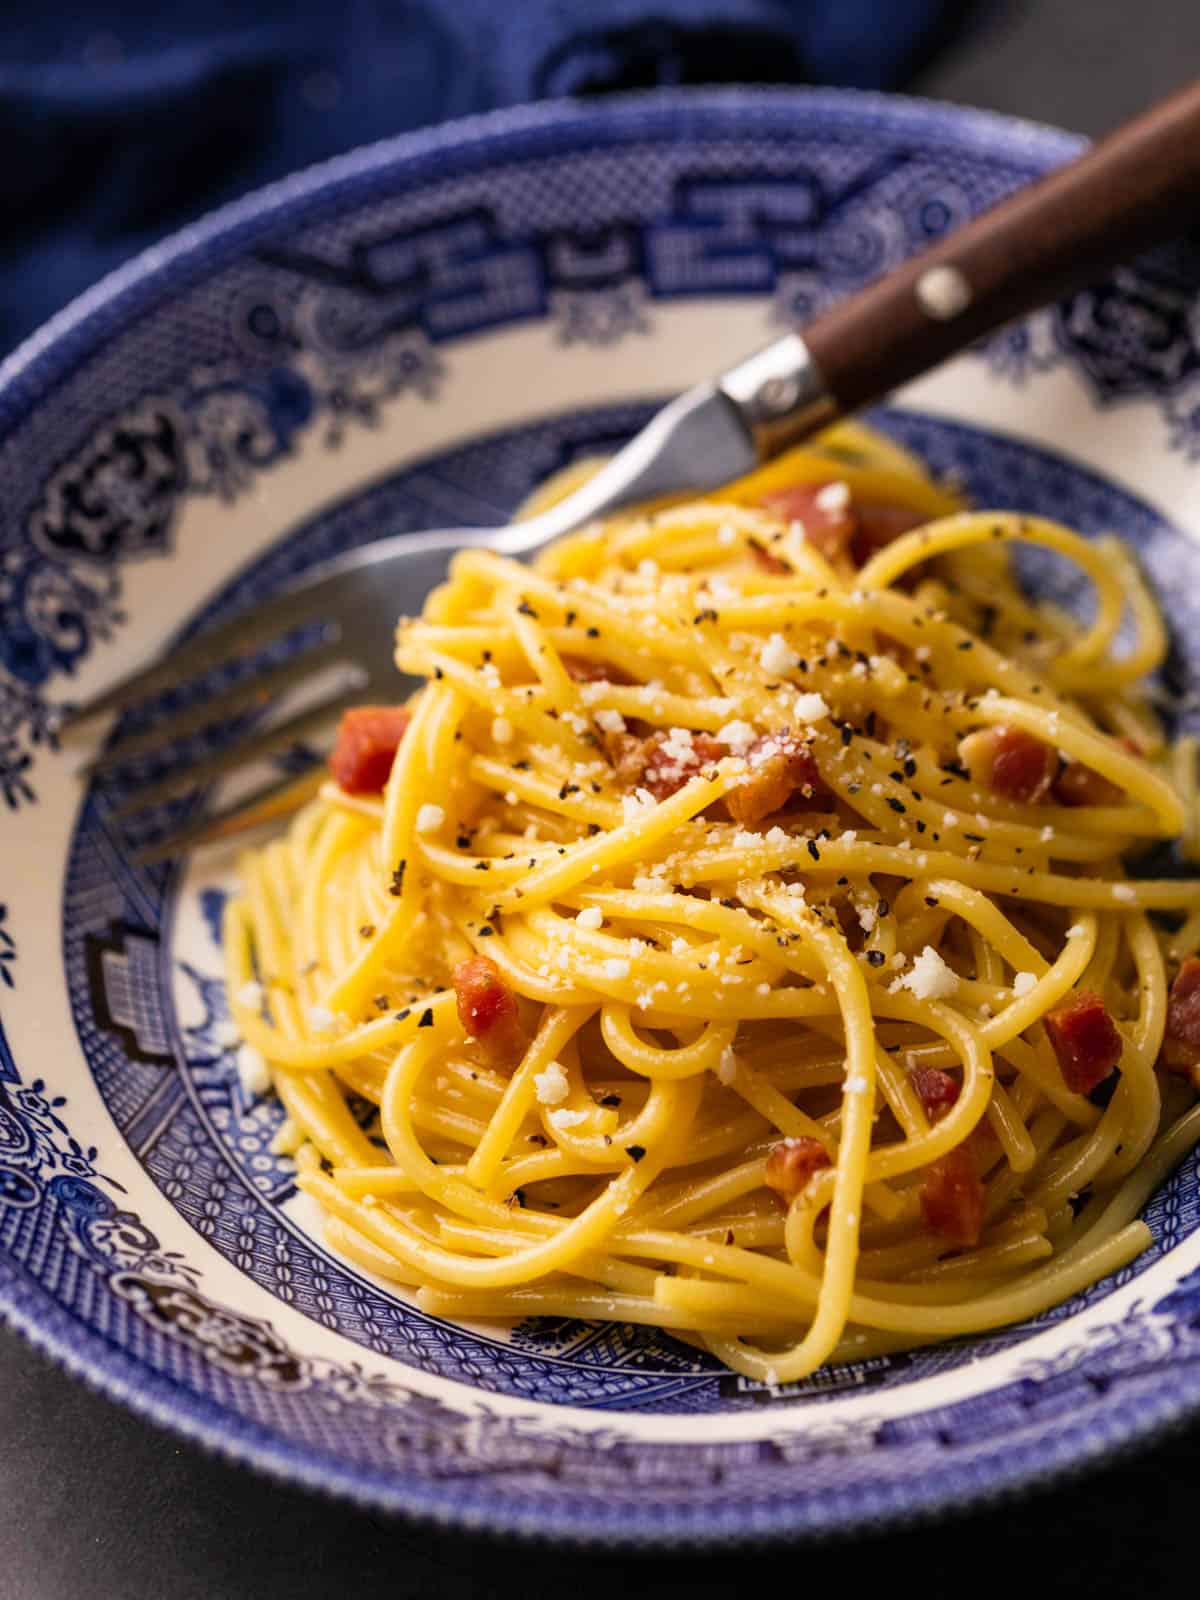 spaghetti with carbonara sauce, pancetta and grated cheese on top in a blue and white bowl.